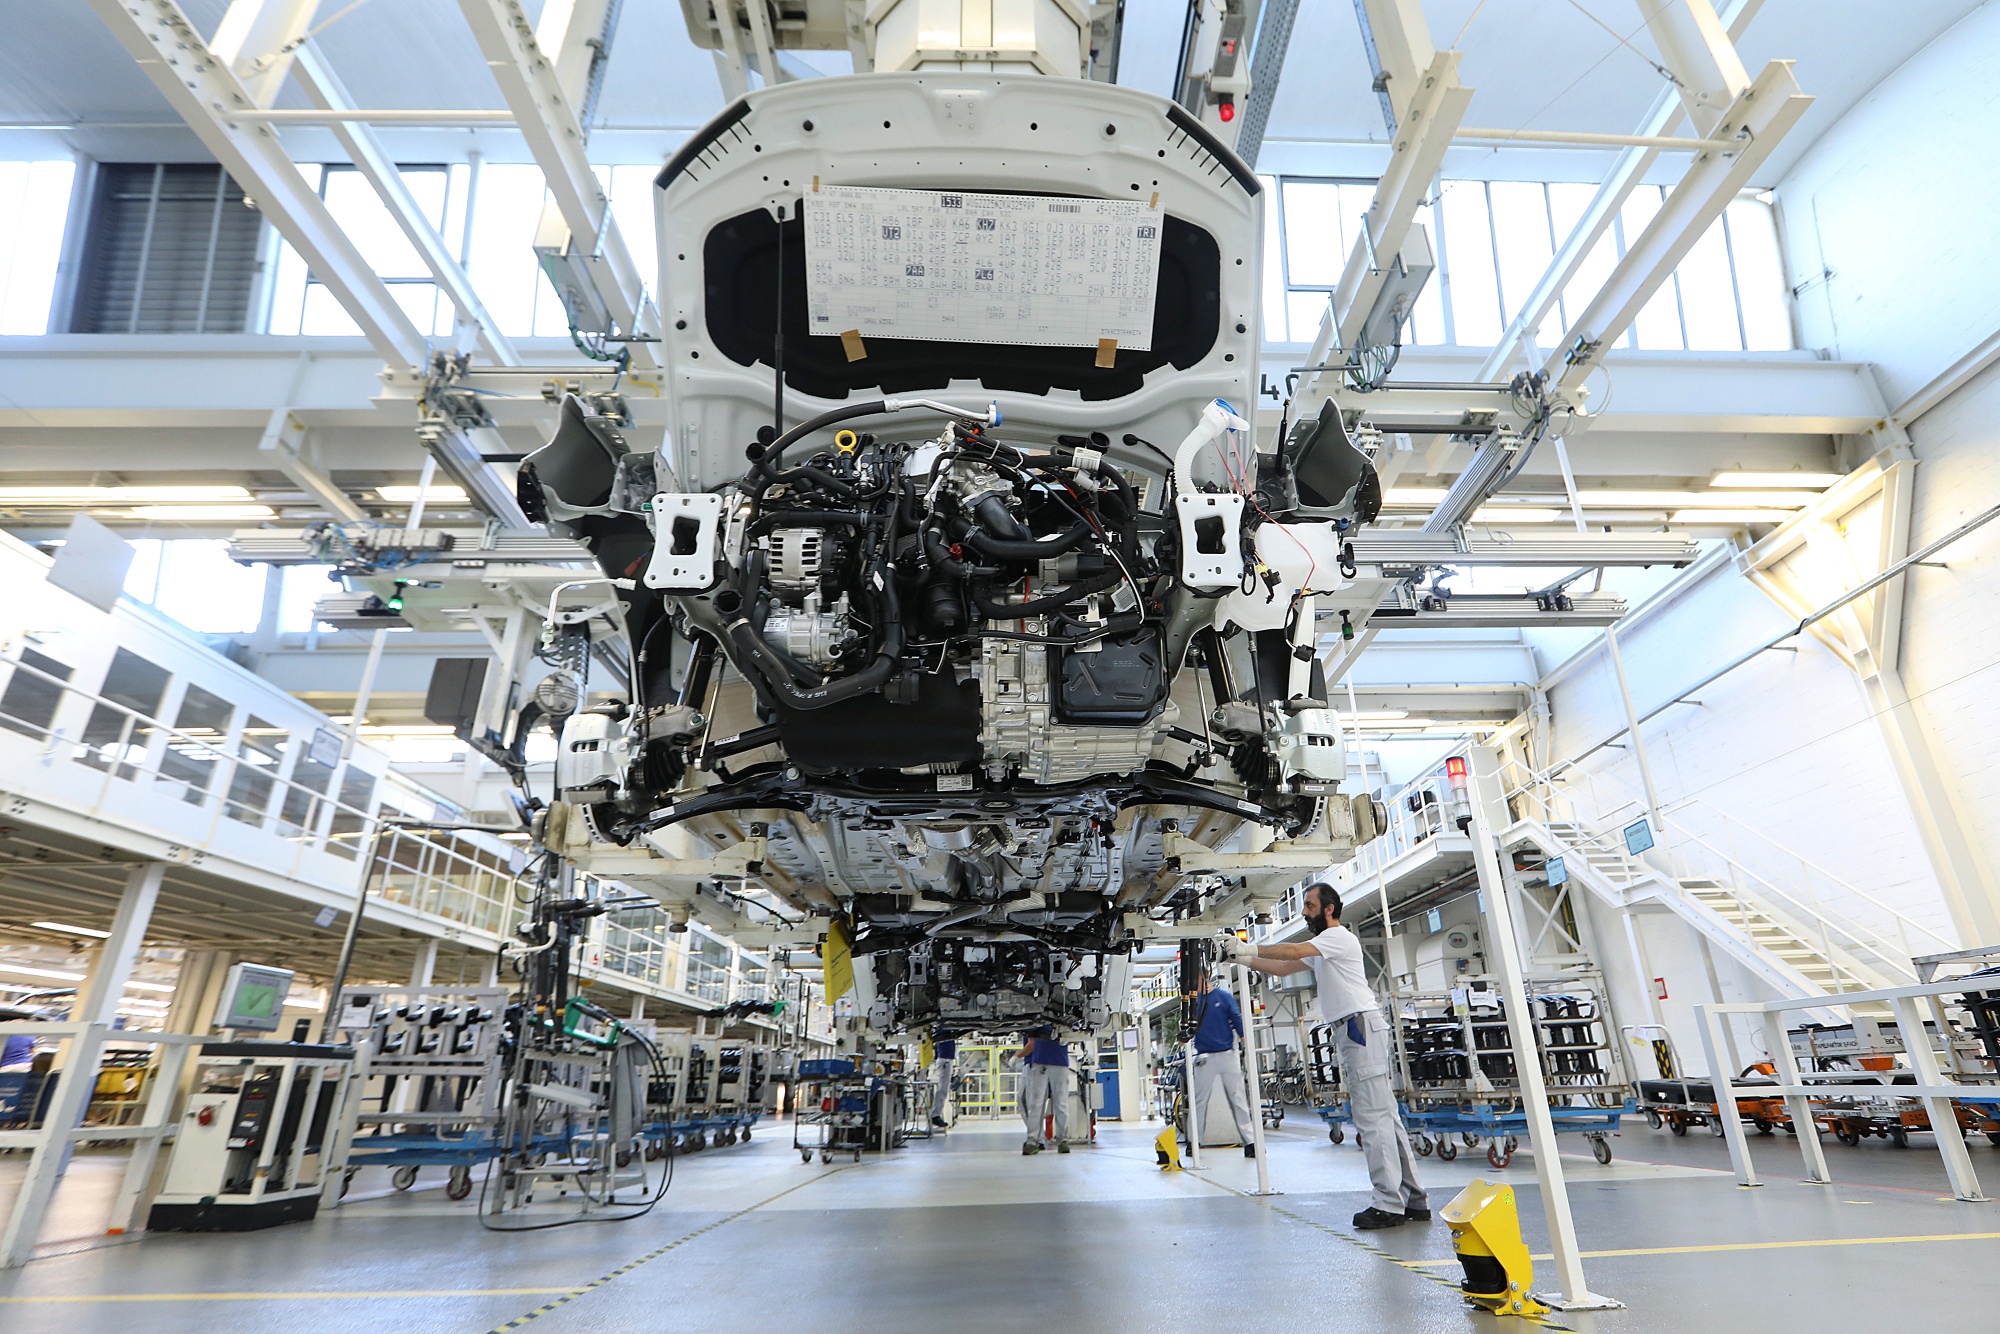 A Volkswagen Tiguan hangs from a cradle on the assembly line at the Volkswagen AG (VW) factory in Wolfsburg. Photographer: Krisztian Bocsi/Bloomberg